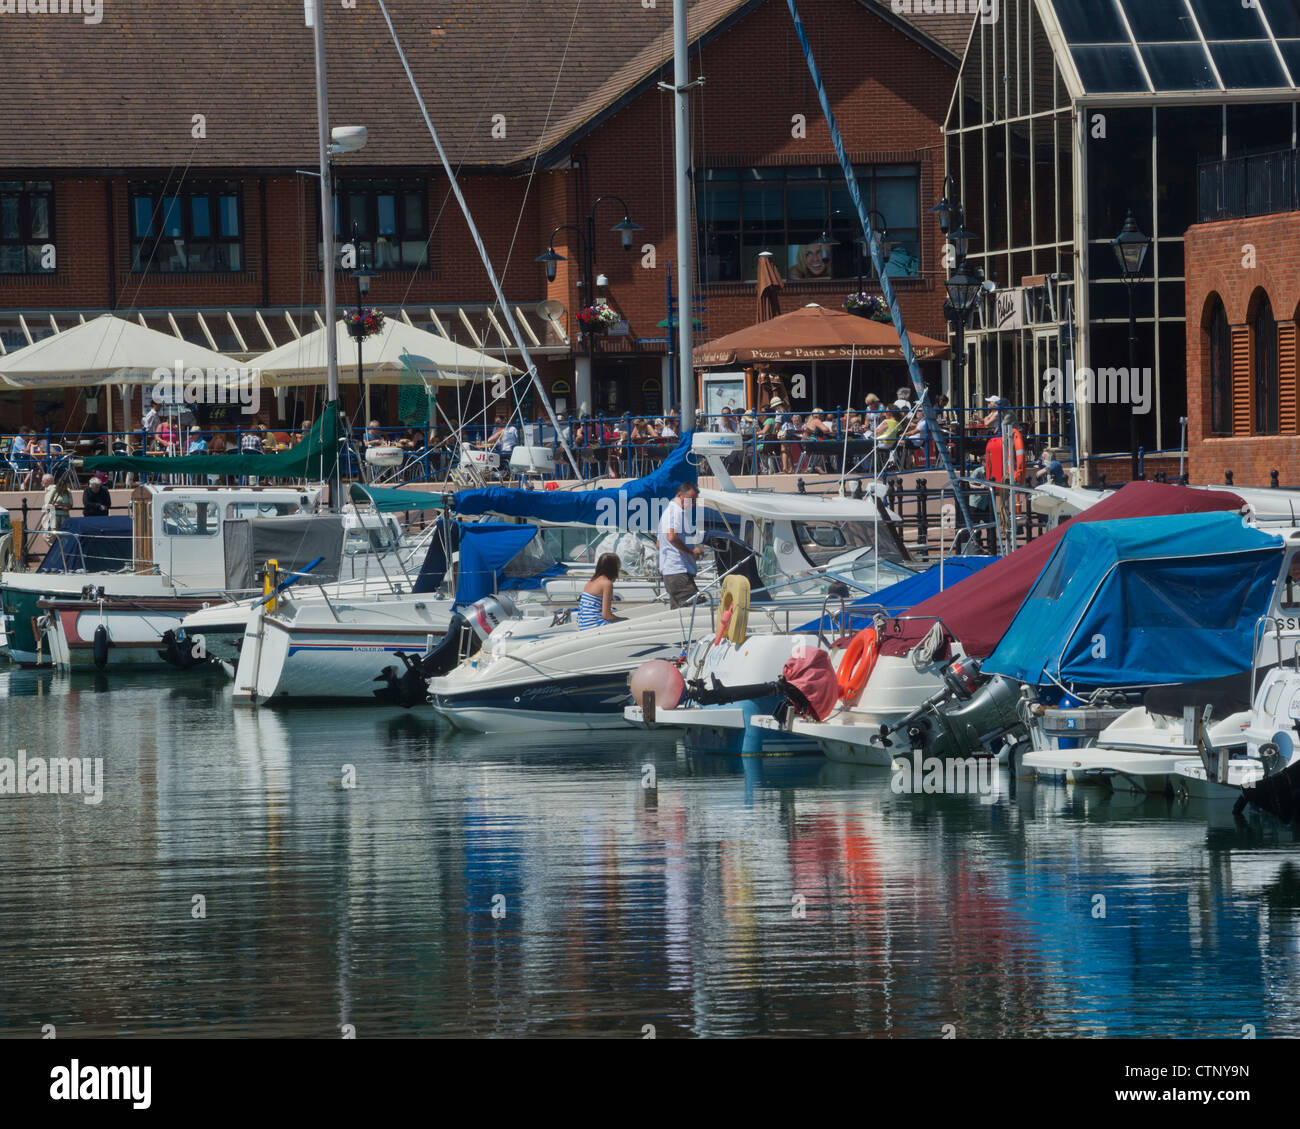 The Waterfront, Sovereign Harbour, Eastbourne, East Sussex, England, UK Stock Photo